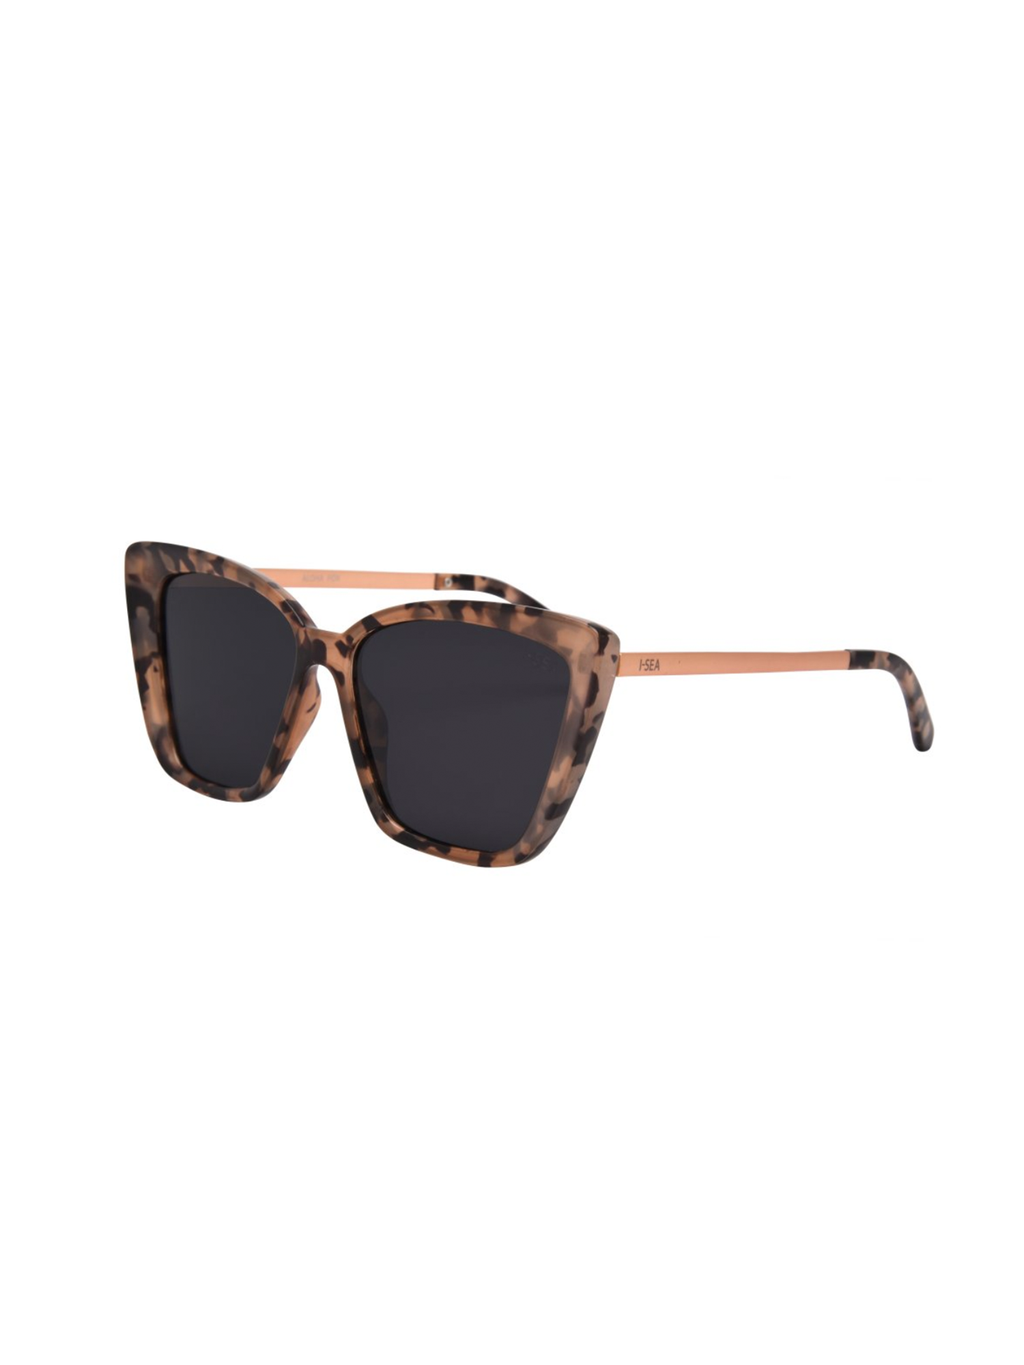 Aloha Fox Sunnies in Blonde Tort/Smoke - Stitch And Feather